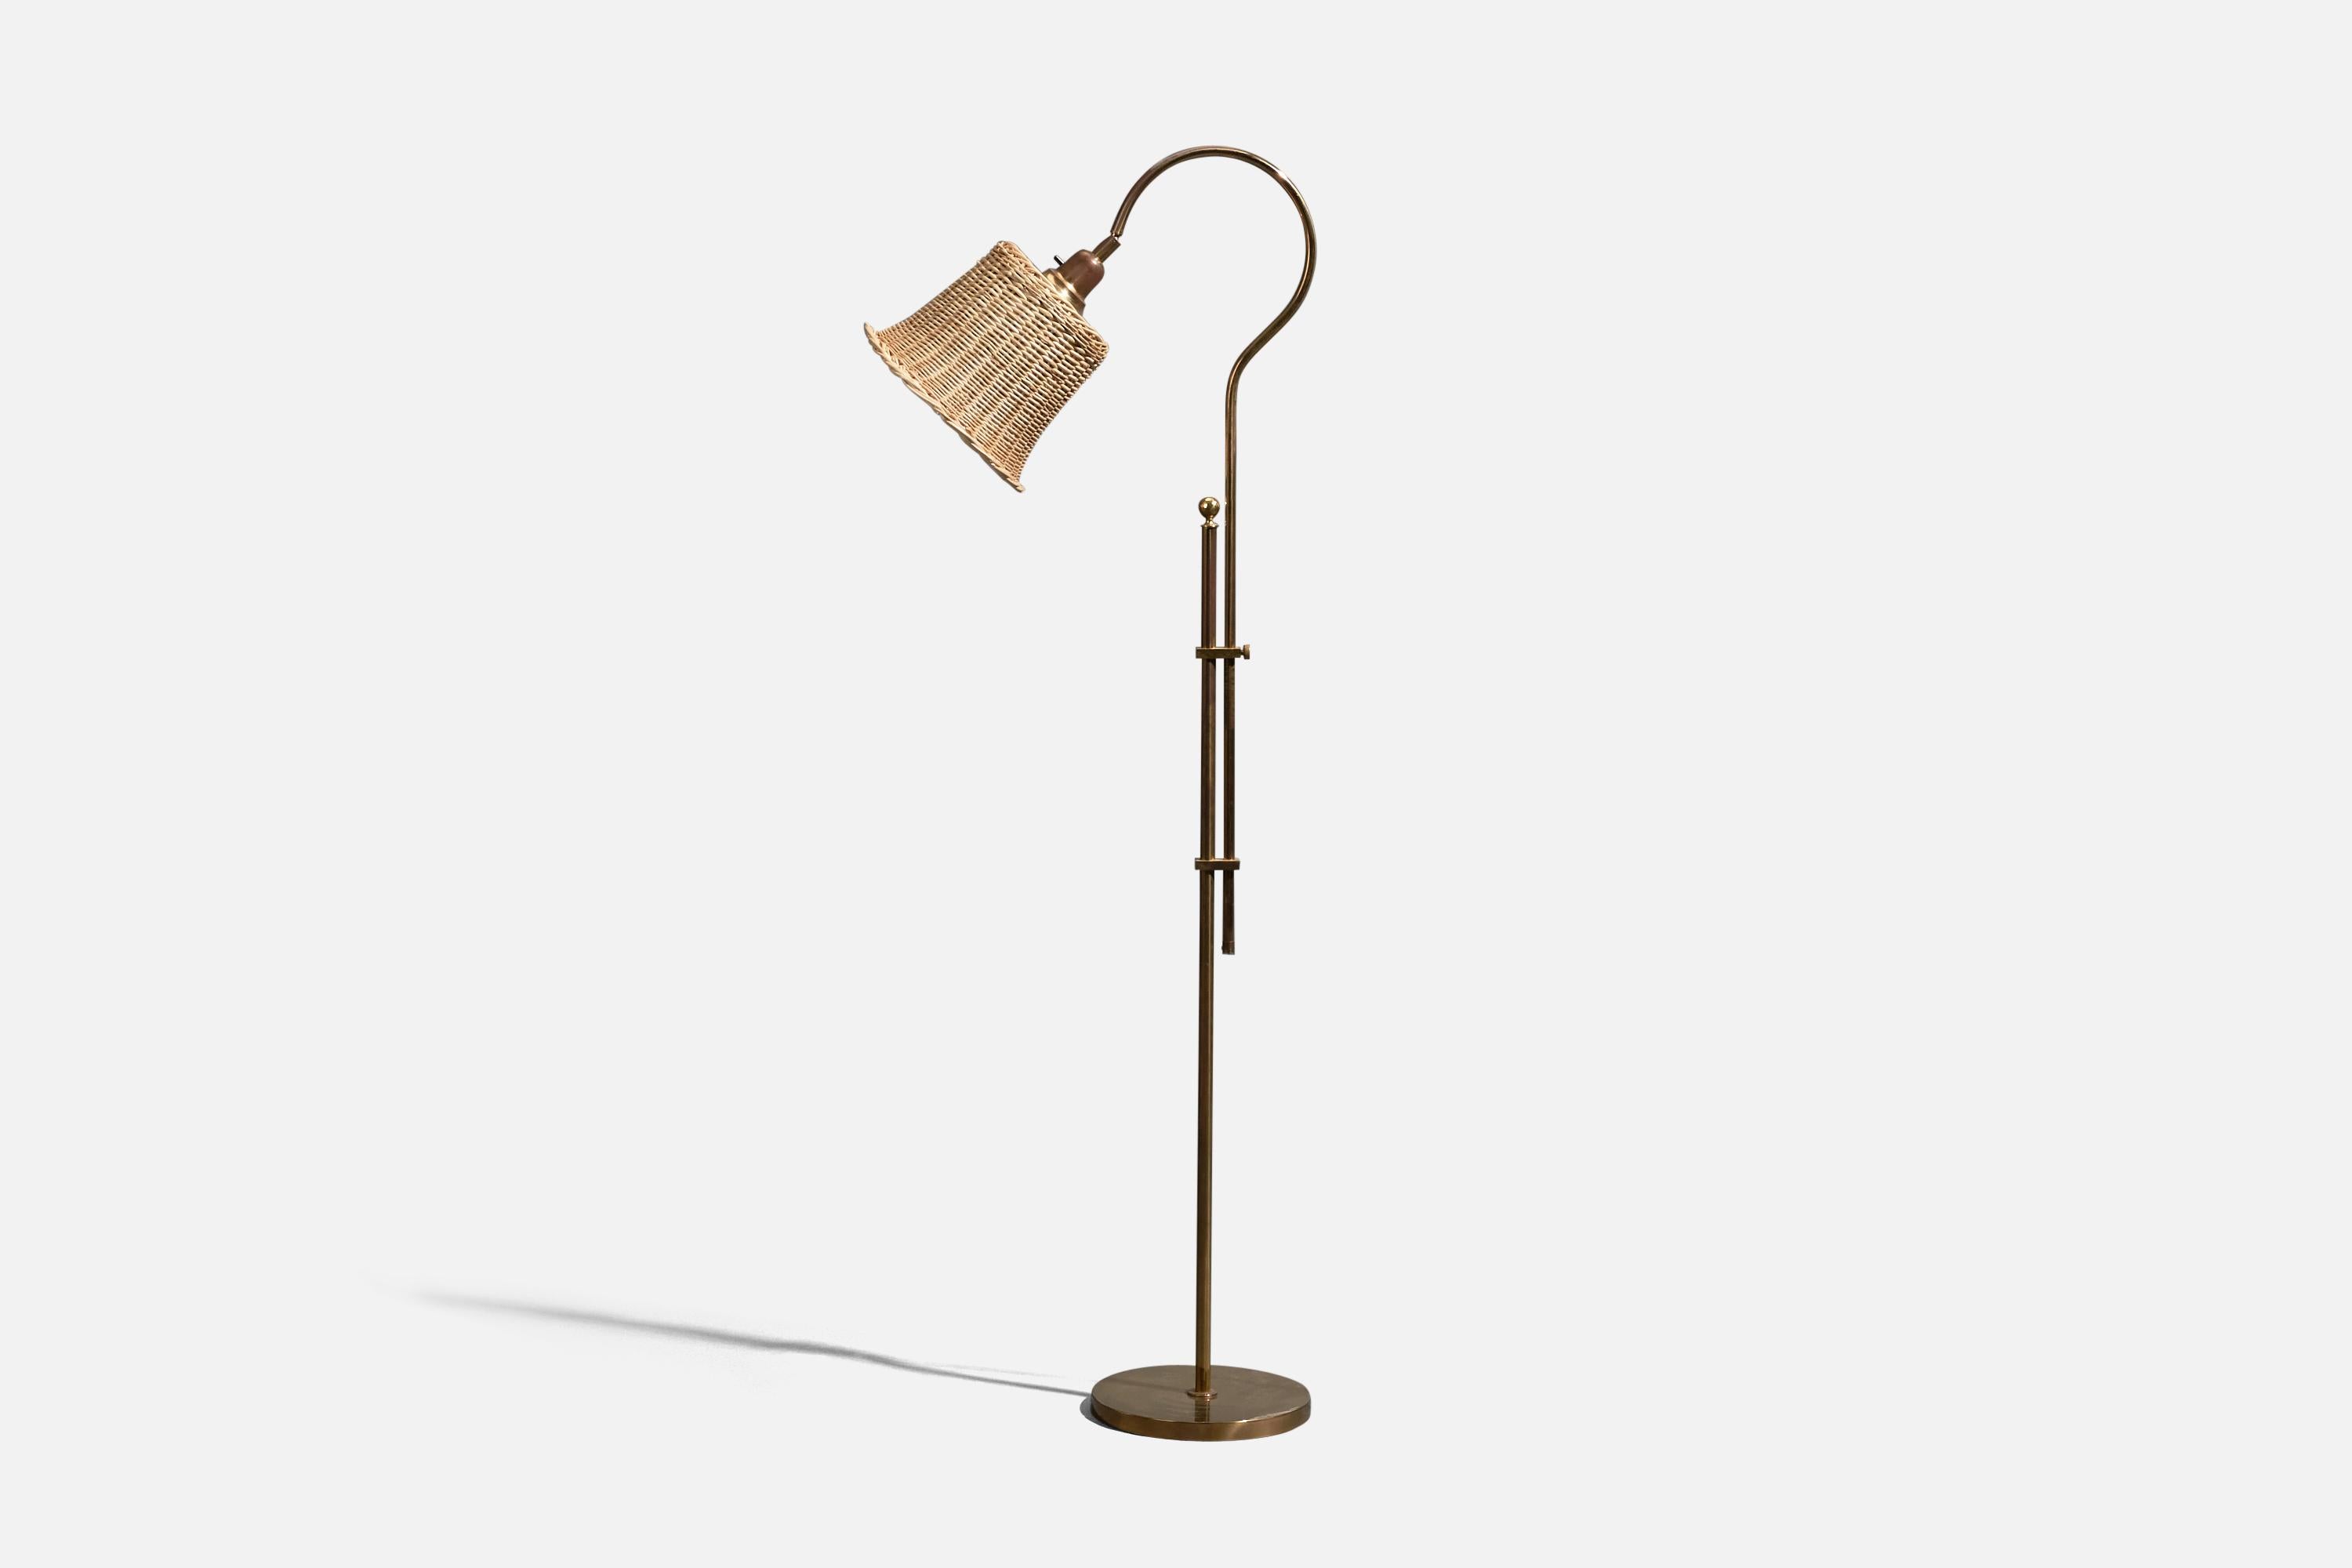 An adjustable, brass and rattan floor lamp designed and produced in Sweden, 1970s.

Dimensions variable, measured as illustrated in first image.

Sold with Lampshade. Dimensions stated are of Floor Lamp with Lampshade. 

Socket takes standard